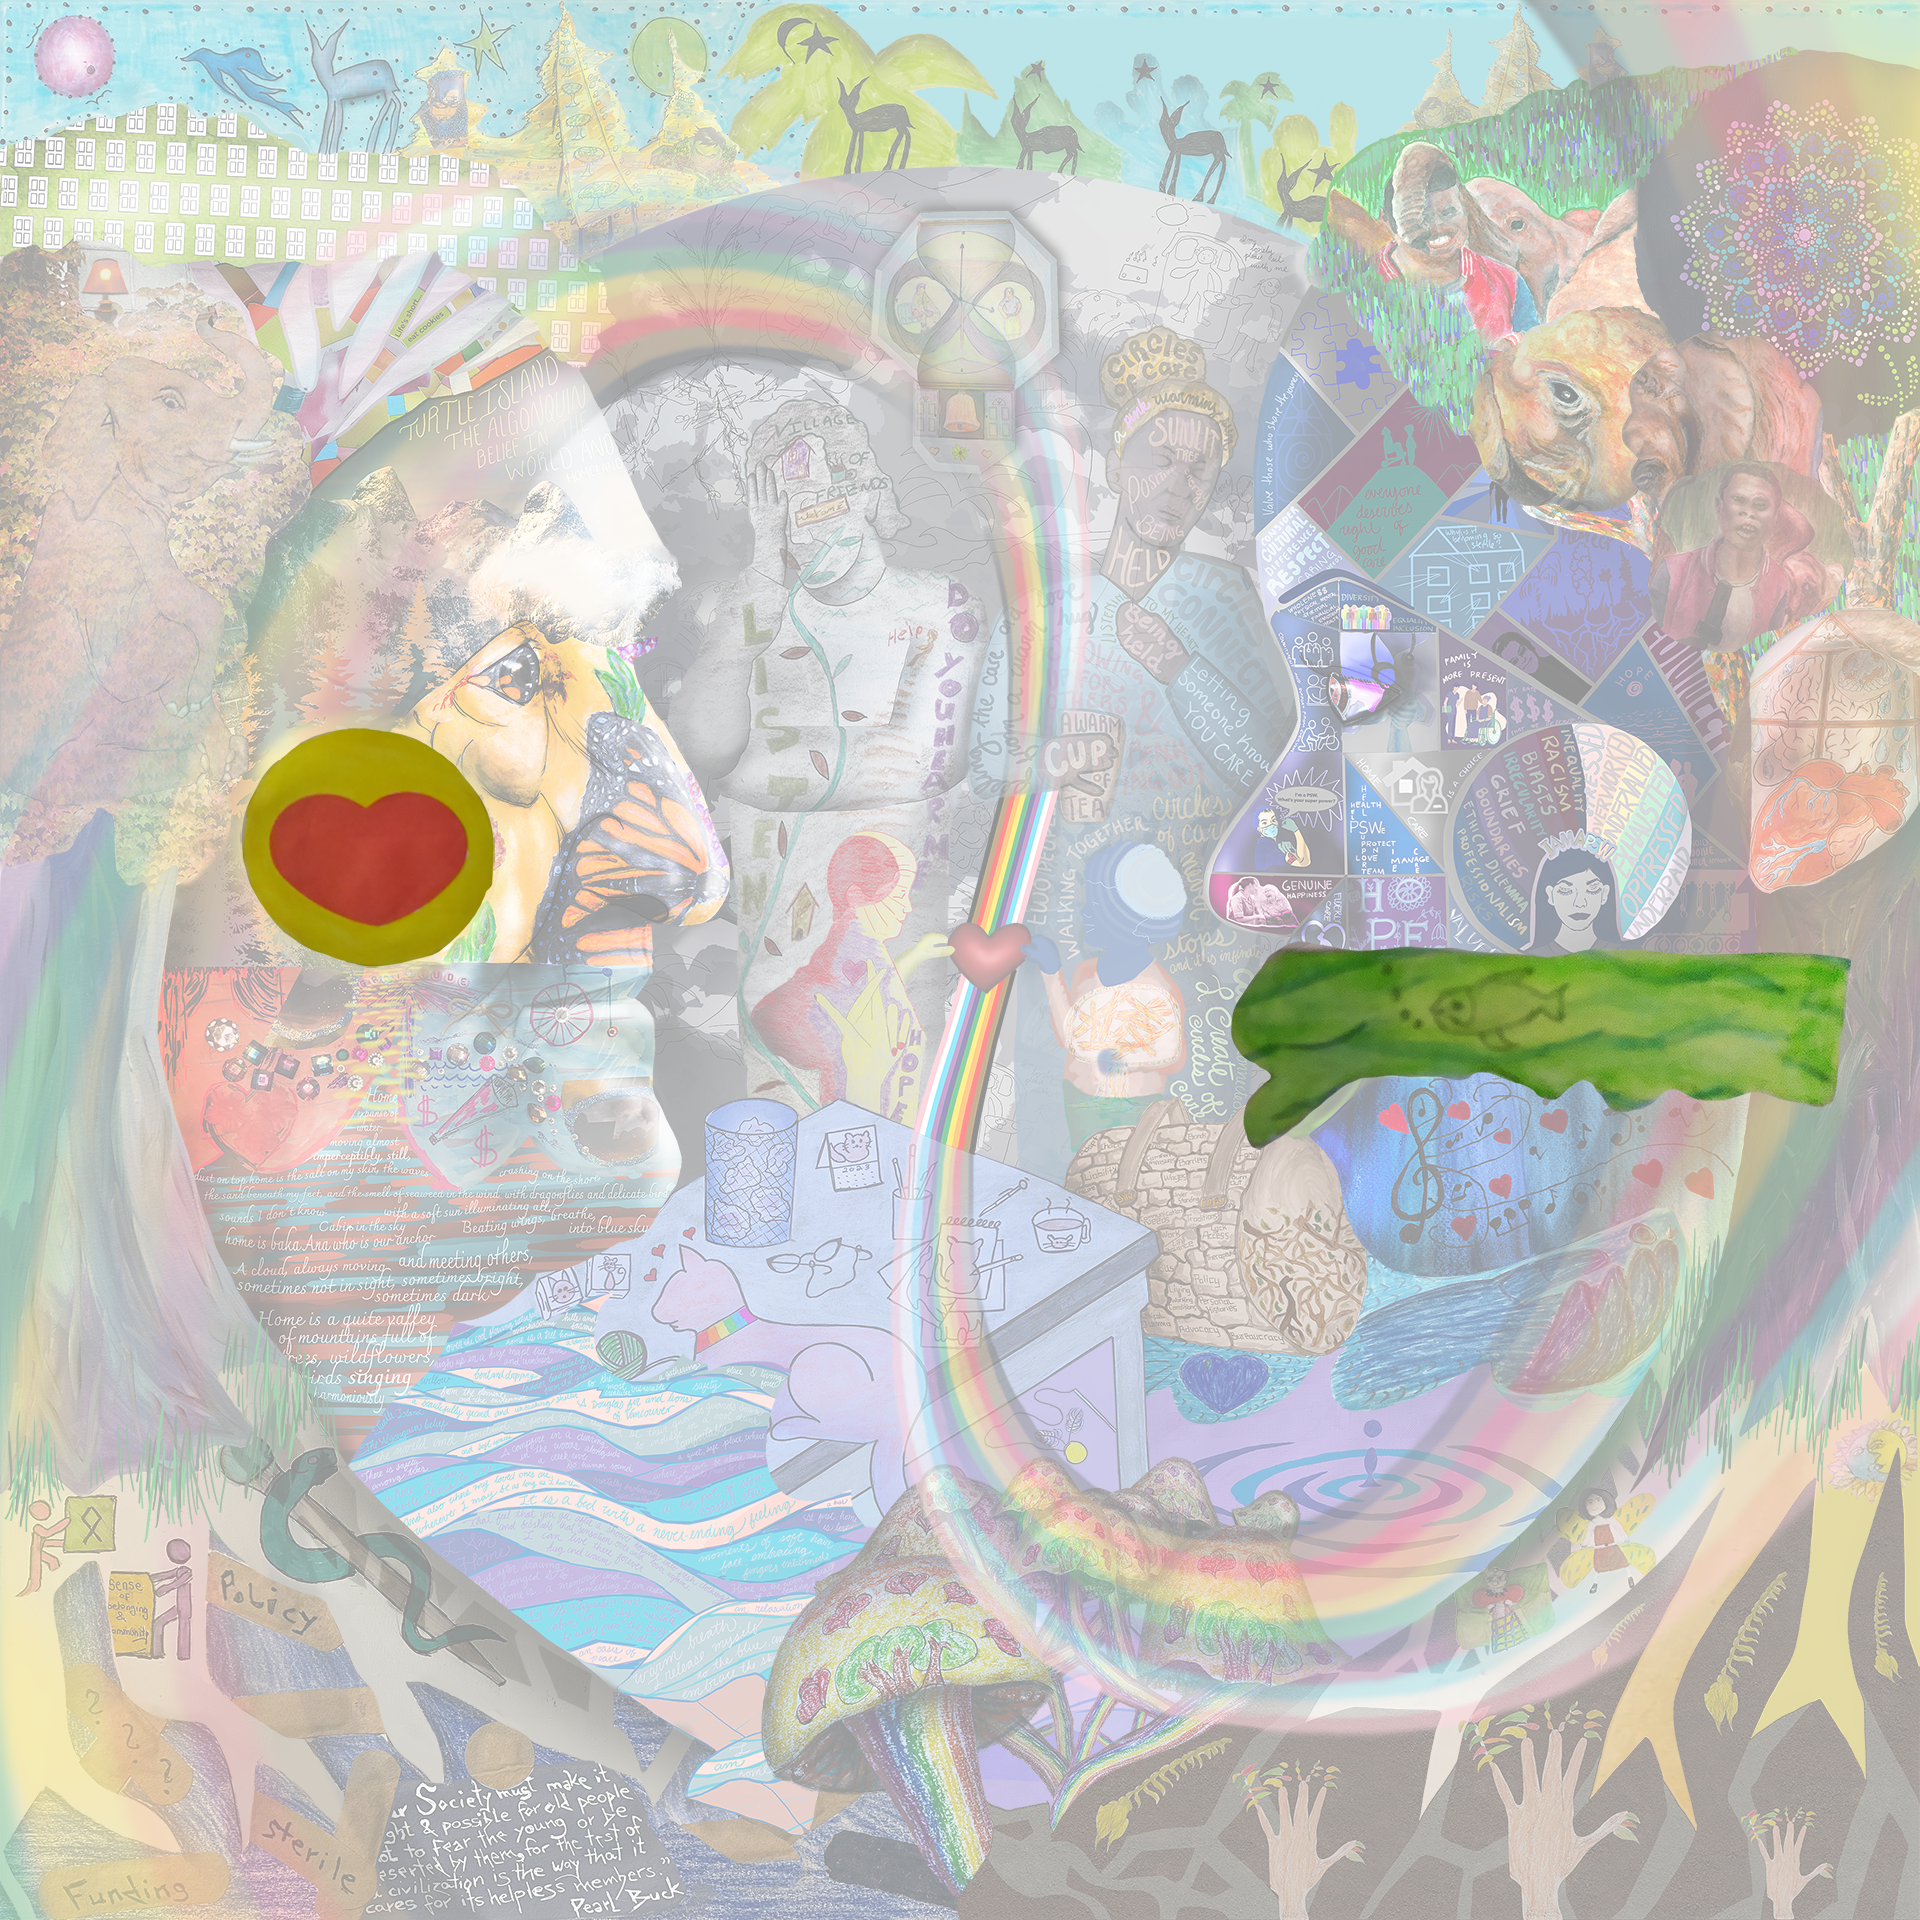 This layer depicts SD's artwork. The first image shows a red heart on a yellow-green backdrop. The second image is of a fish with air bubbles on a green backdrop.